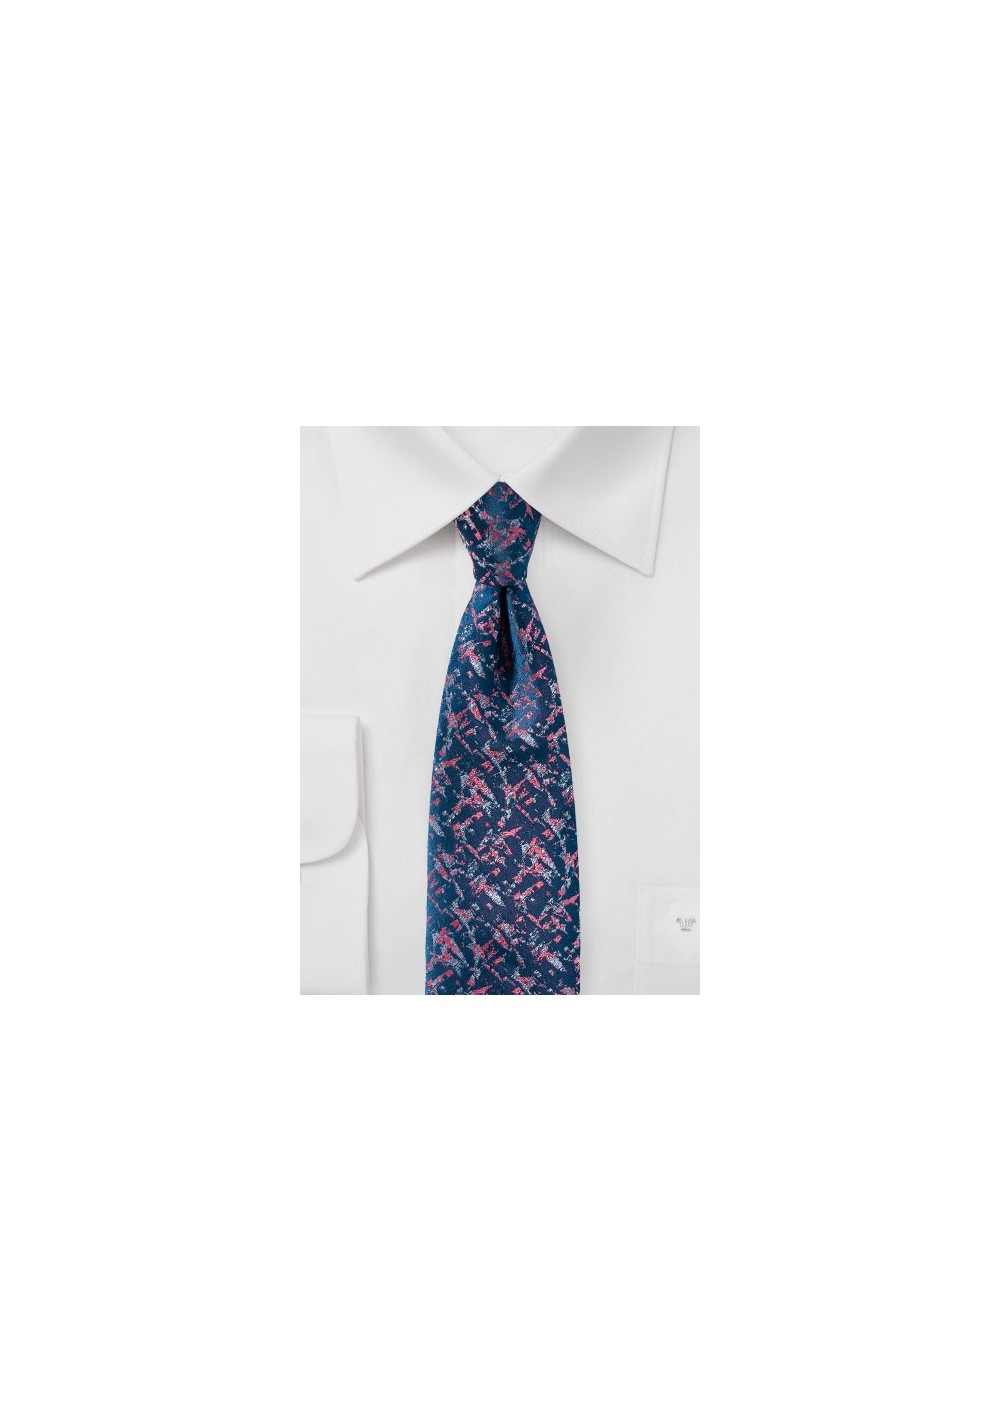 Abstract Designer Tie in Blue and Coral